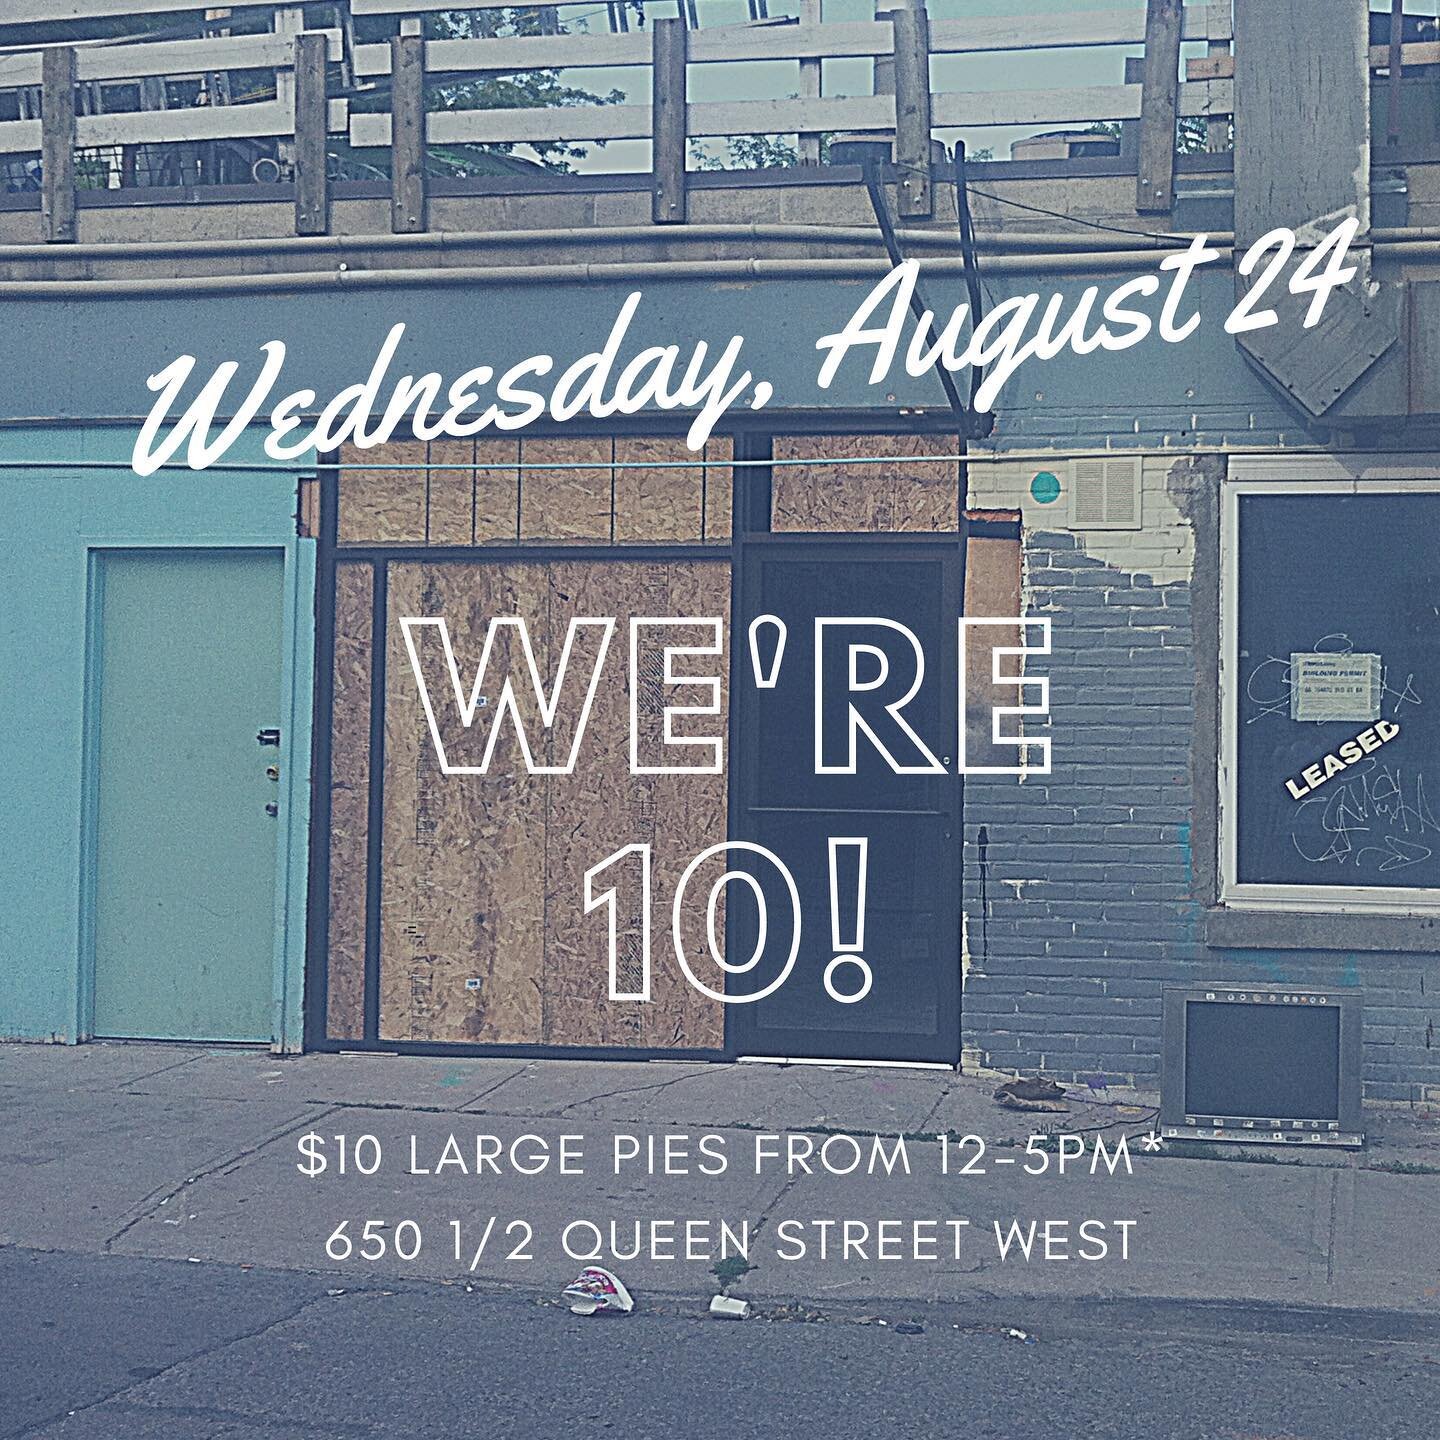 It&rsquo;s been 10 years pals. To celebrate, our 650.5 Queen St W location will be offering $10 (plus HST) large Margherita and NY Cheese pies from 12-5pm on Wednesday August 24. Walk in only, limit of 1 per customer. We hope to see and celebrate wit